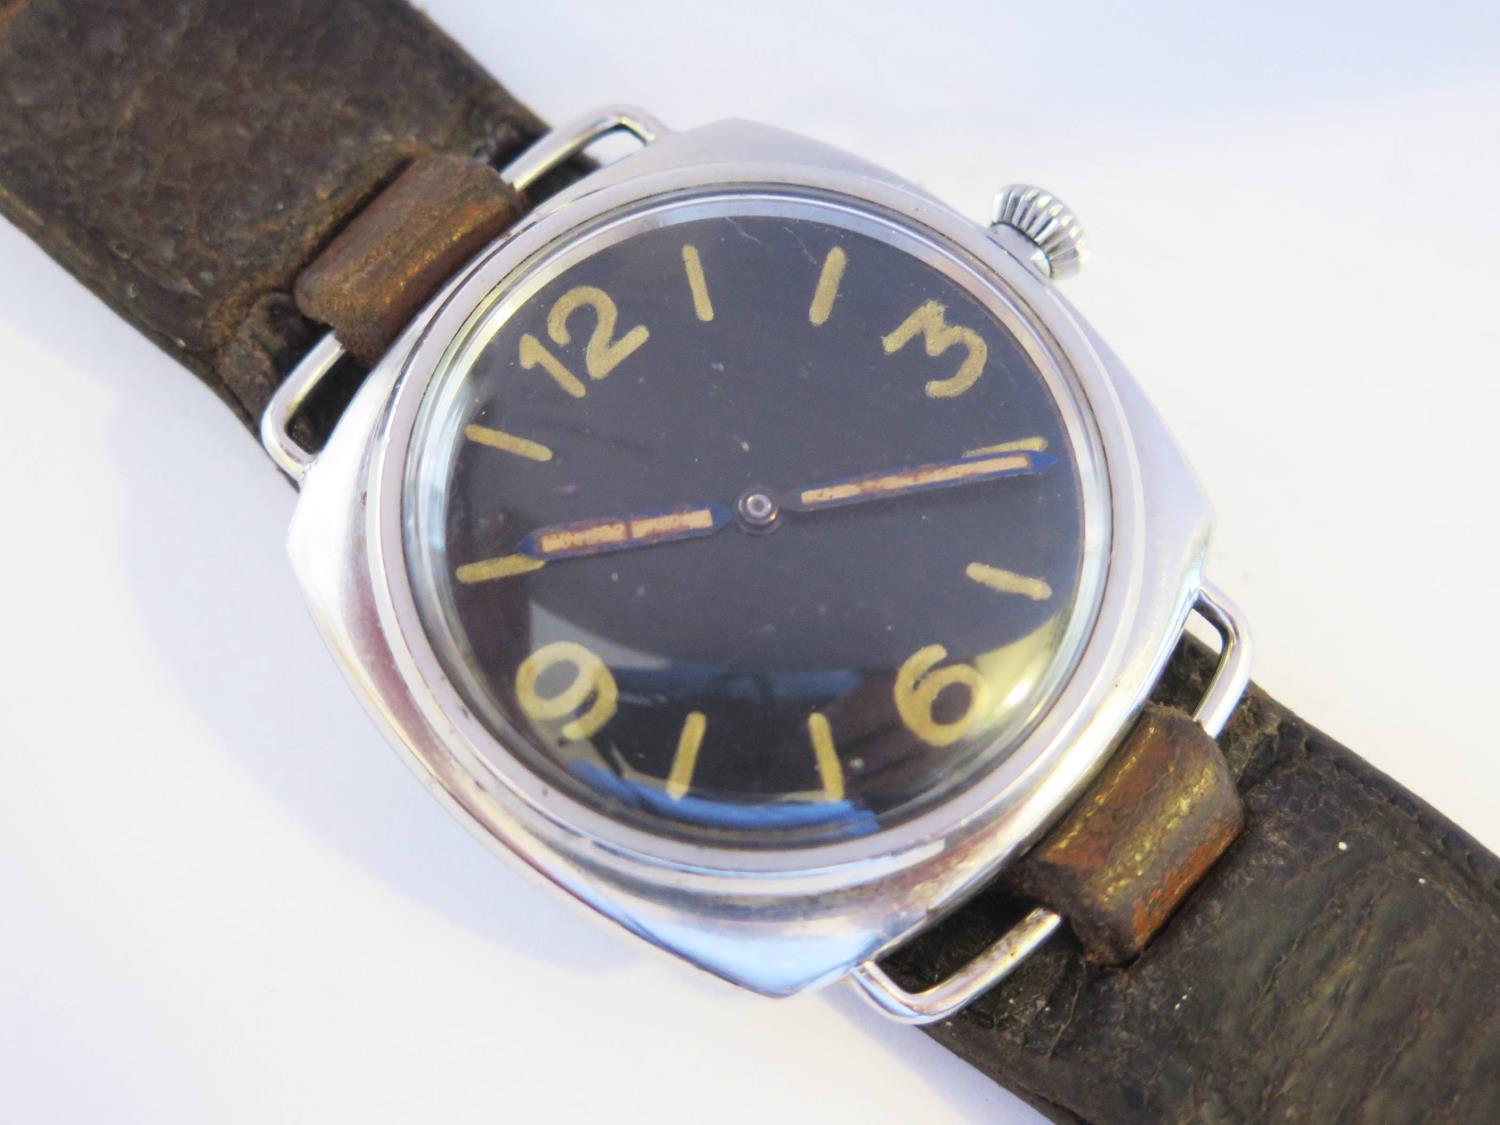 A Rare Panerai WWII Diver's (Kampfschwimmer) Watch. 1944 3646 Type E Rolex 618 Type 1 with anonymous